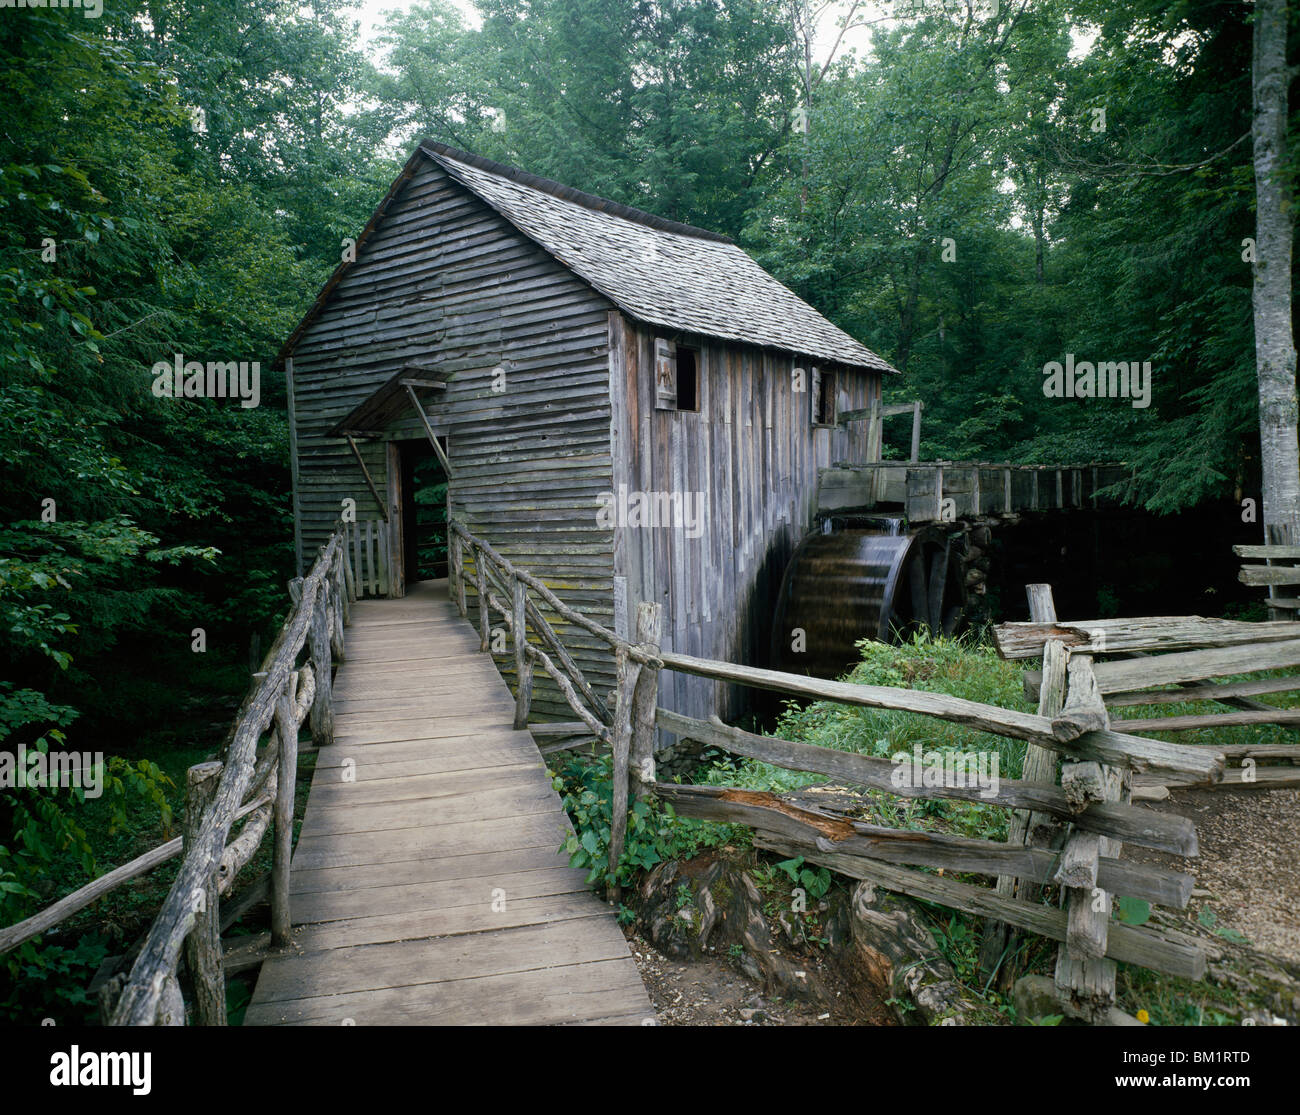 Watermill in a forest, John P. Cable Grist Mill, Cades Cove, Great Smoky Mountains National Park, Tennessee, USA Stock Photo